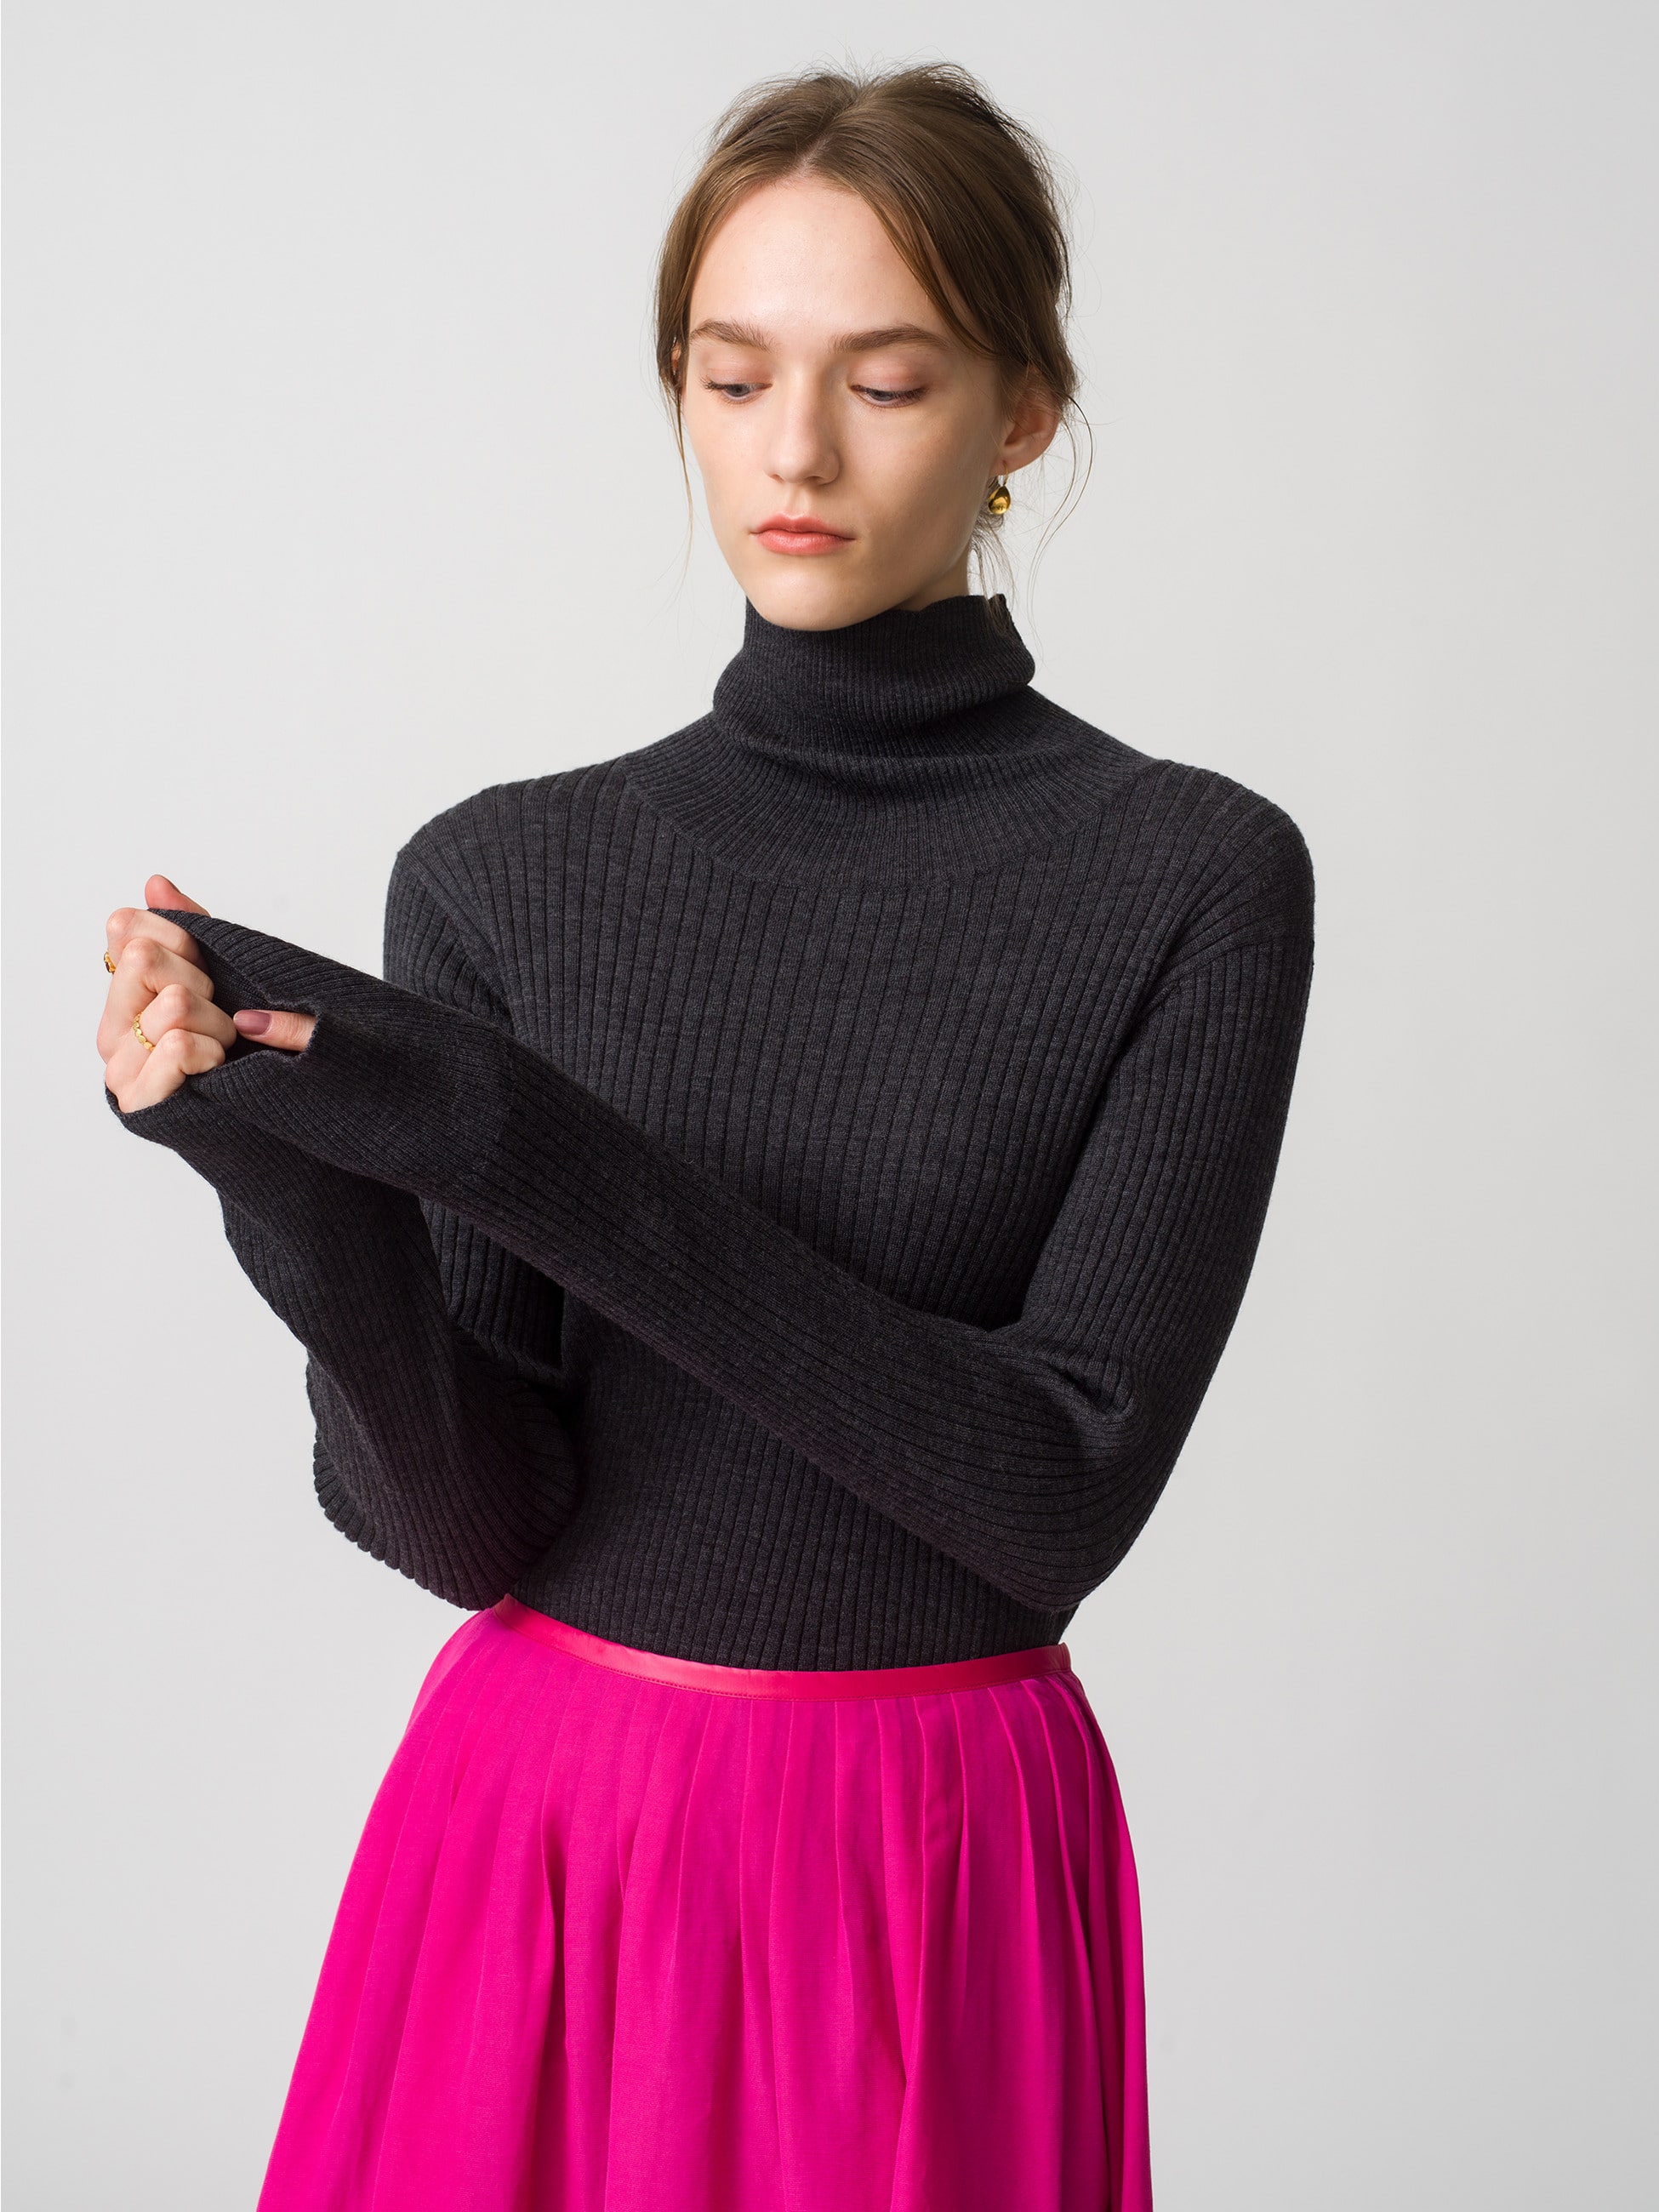 Clear Wool High Gauge Turtle Neck Knit Top｜ebure(エブール)｜Ron